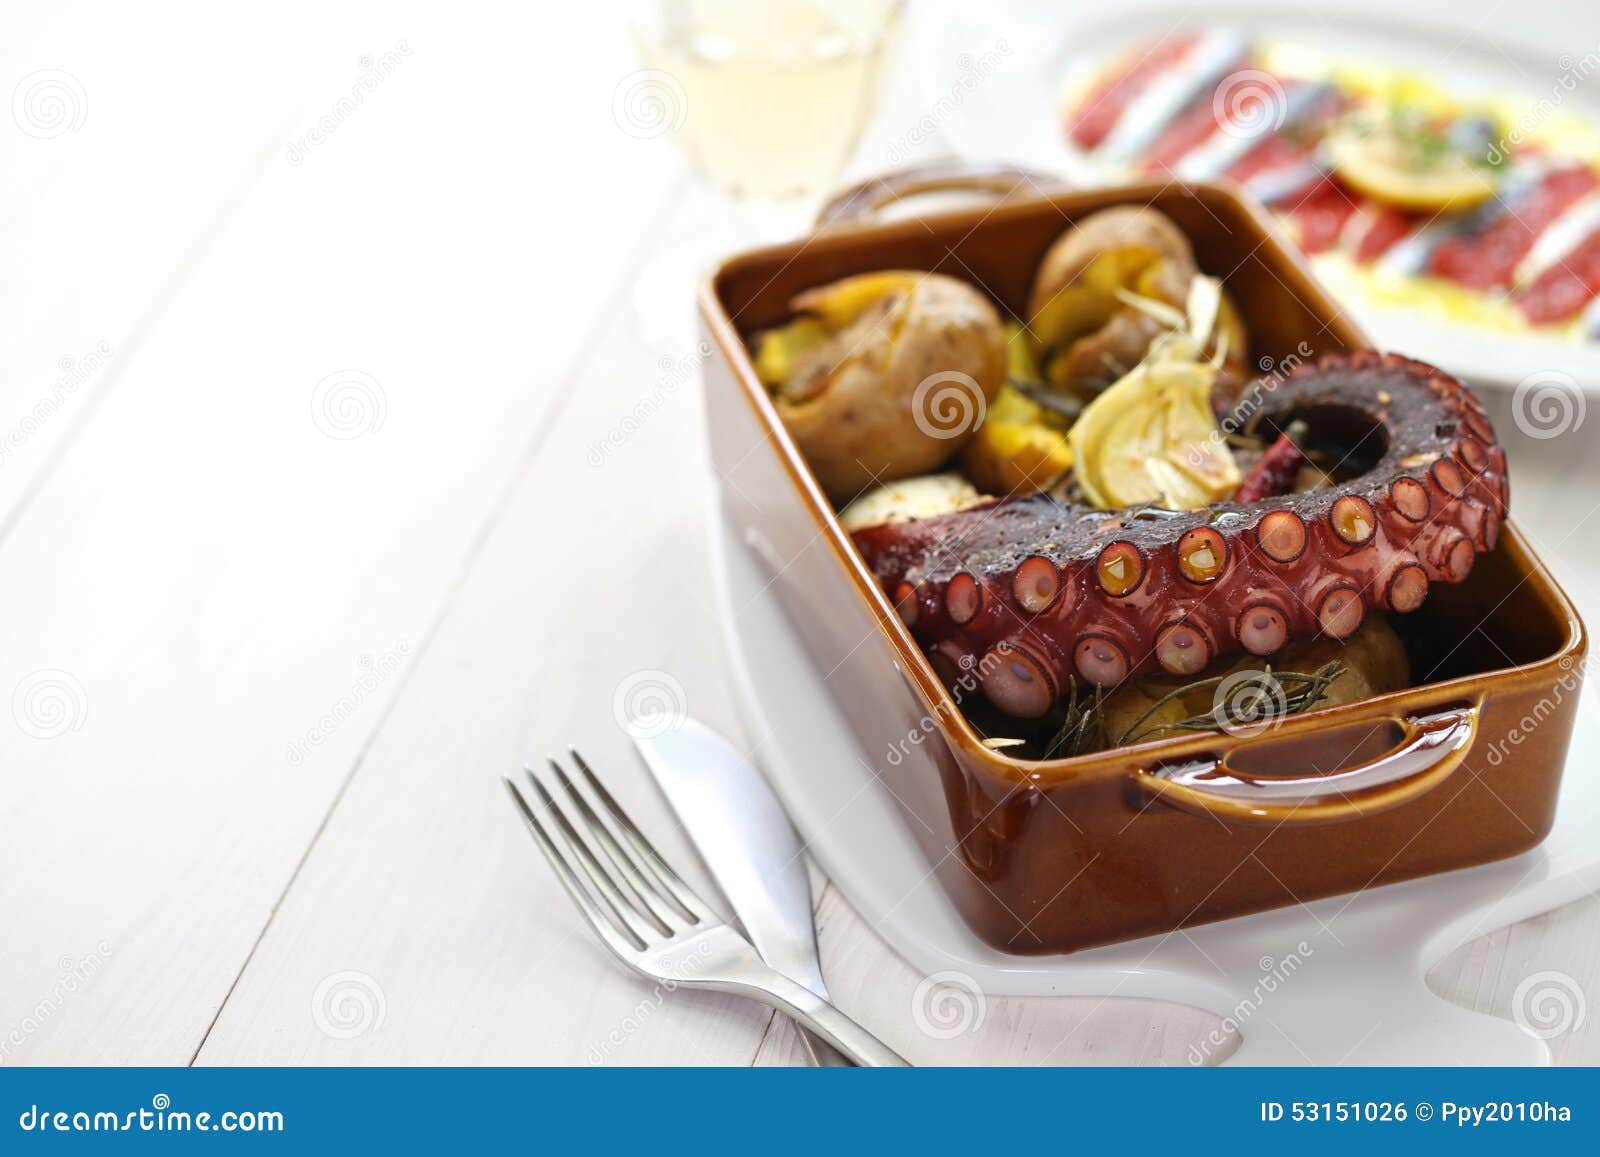 grilled octopus with potatoes, polvo lagareiro, portuguese cuisine